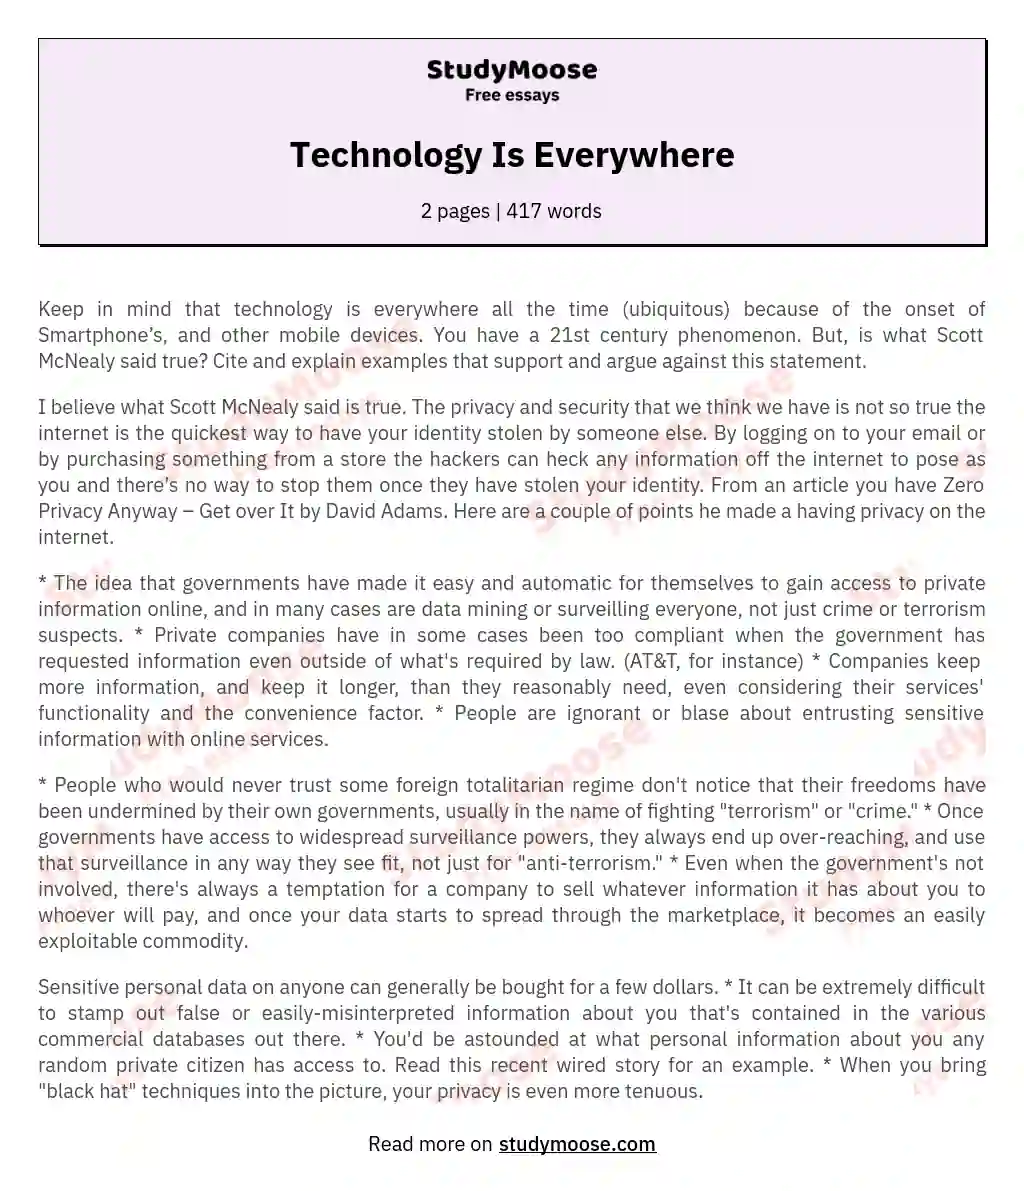 composition about technology